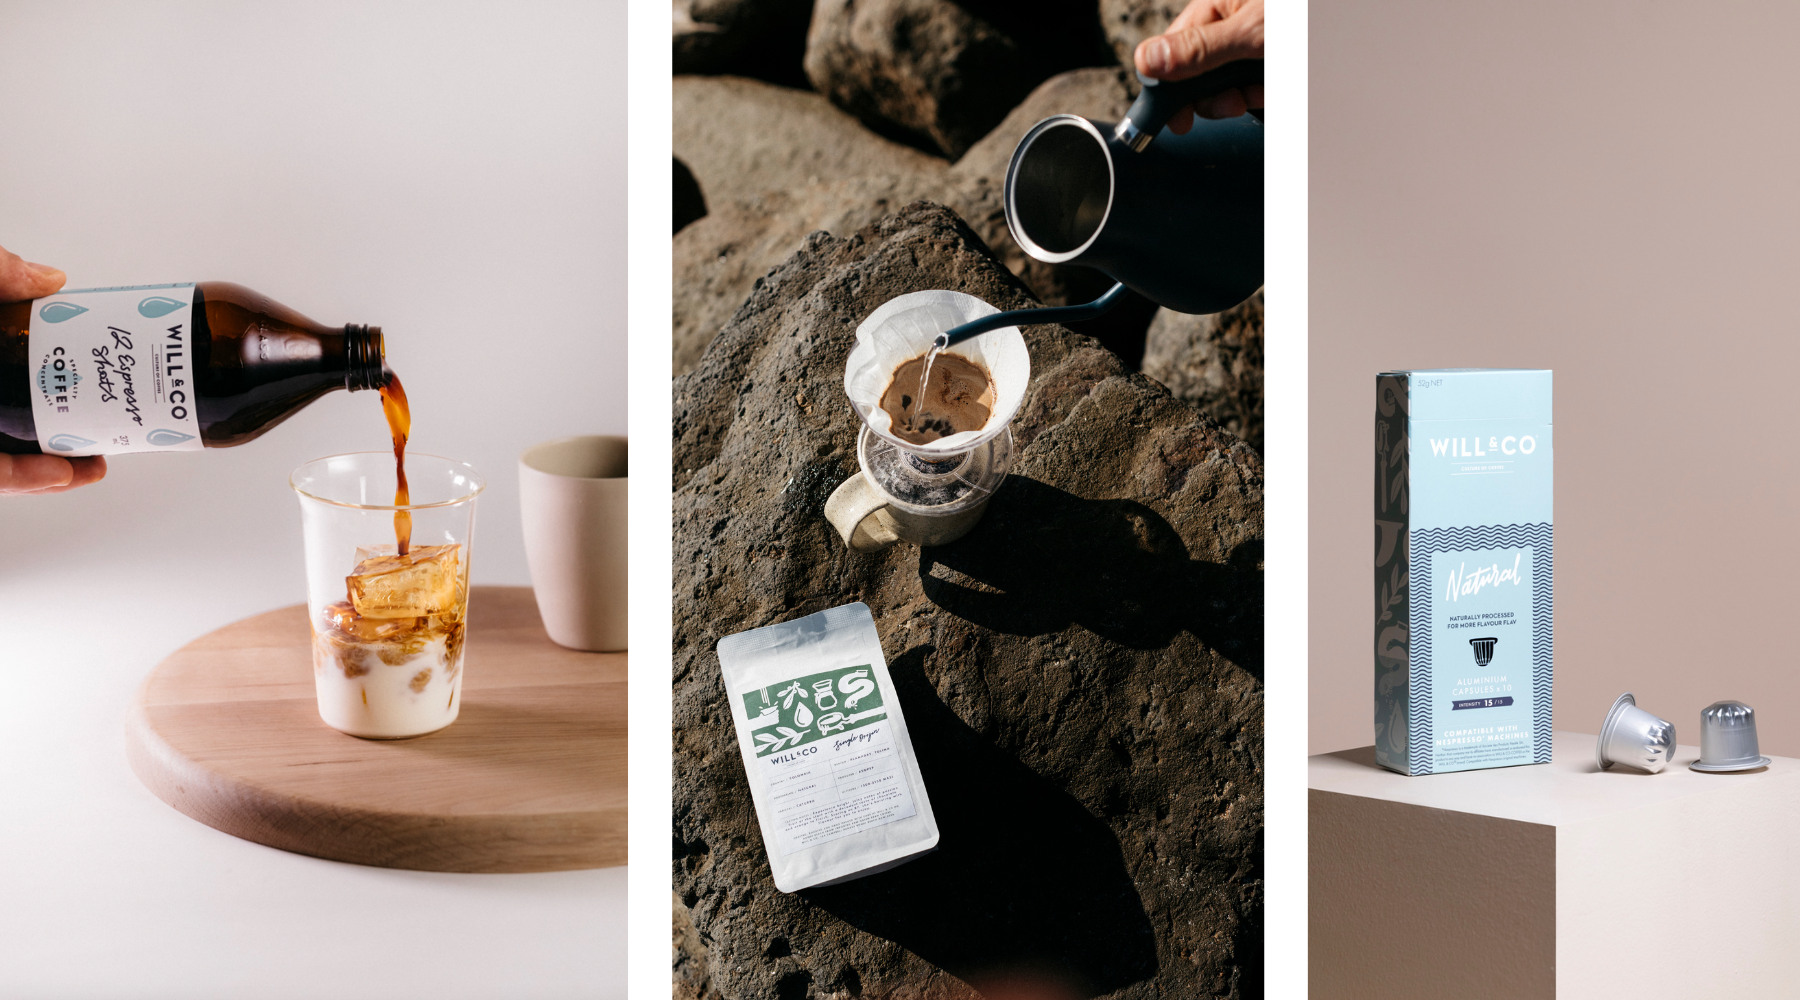 Will & Co has seen their product lineup evolve over the past 10 years - including coffee concentrate, rotating single origins and Nespresso* compatible pods